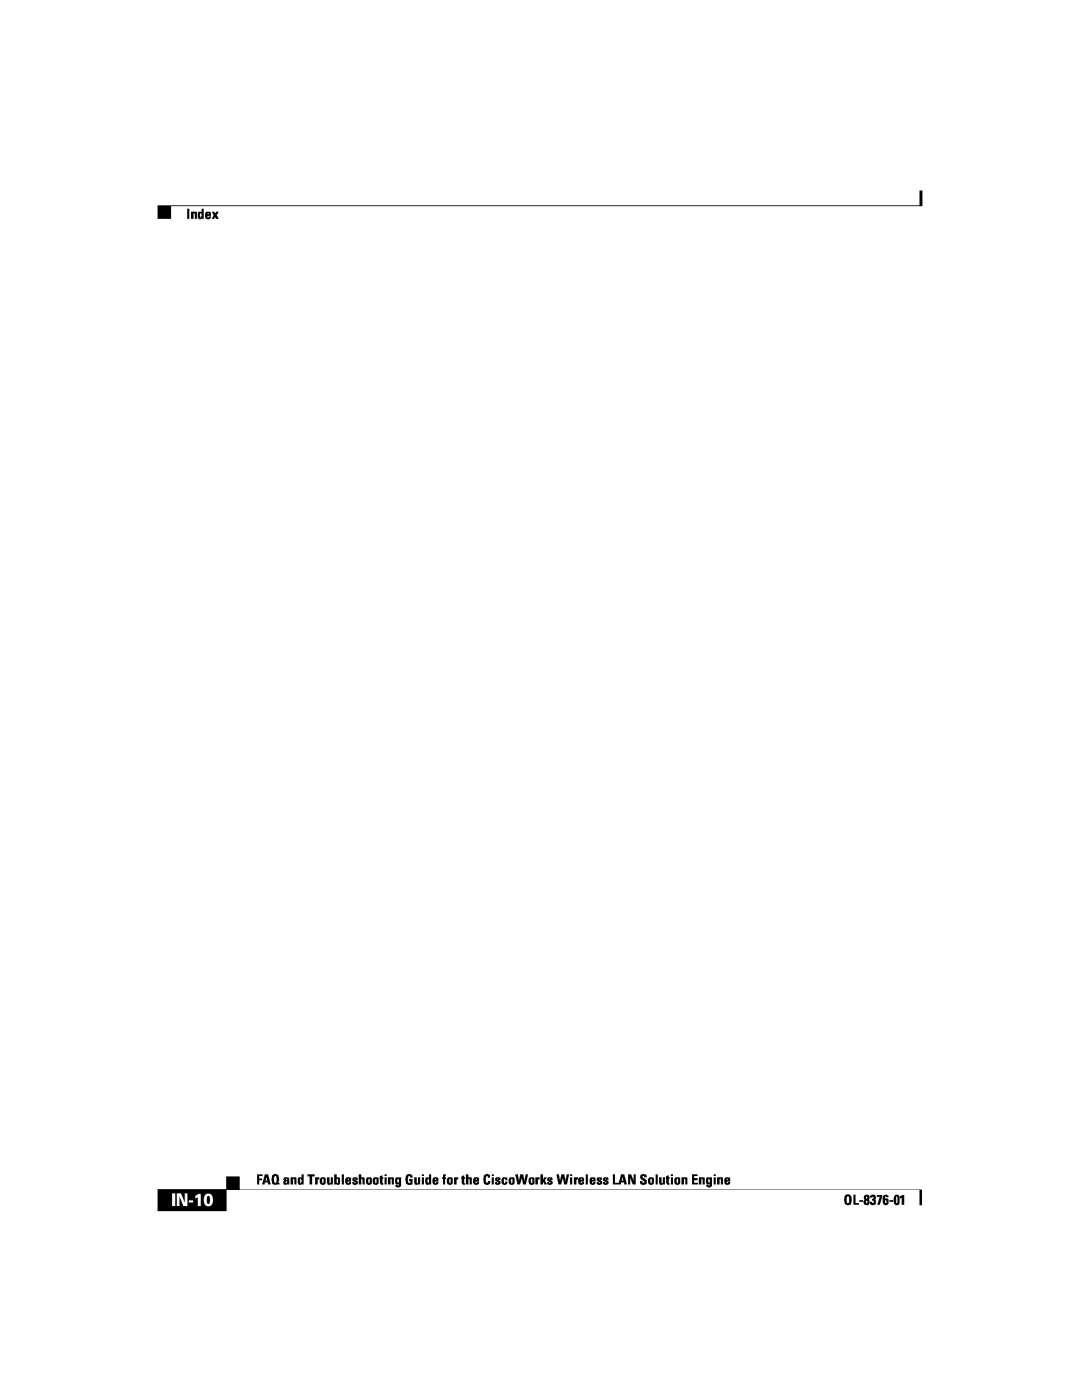 Cisco Systems OL-8376-01 manual IN-10, Index 